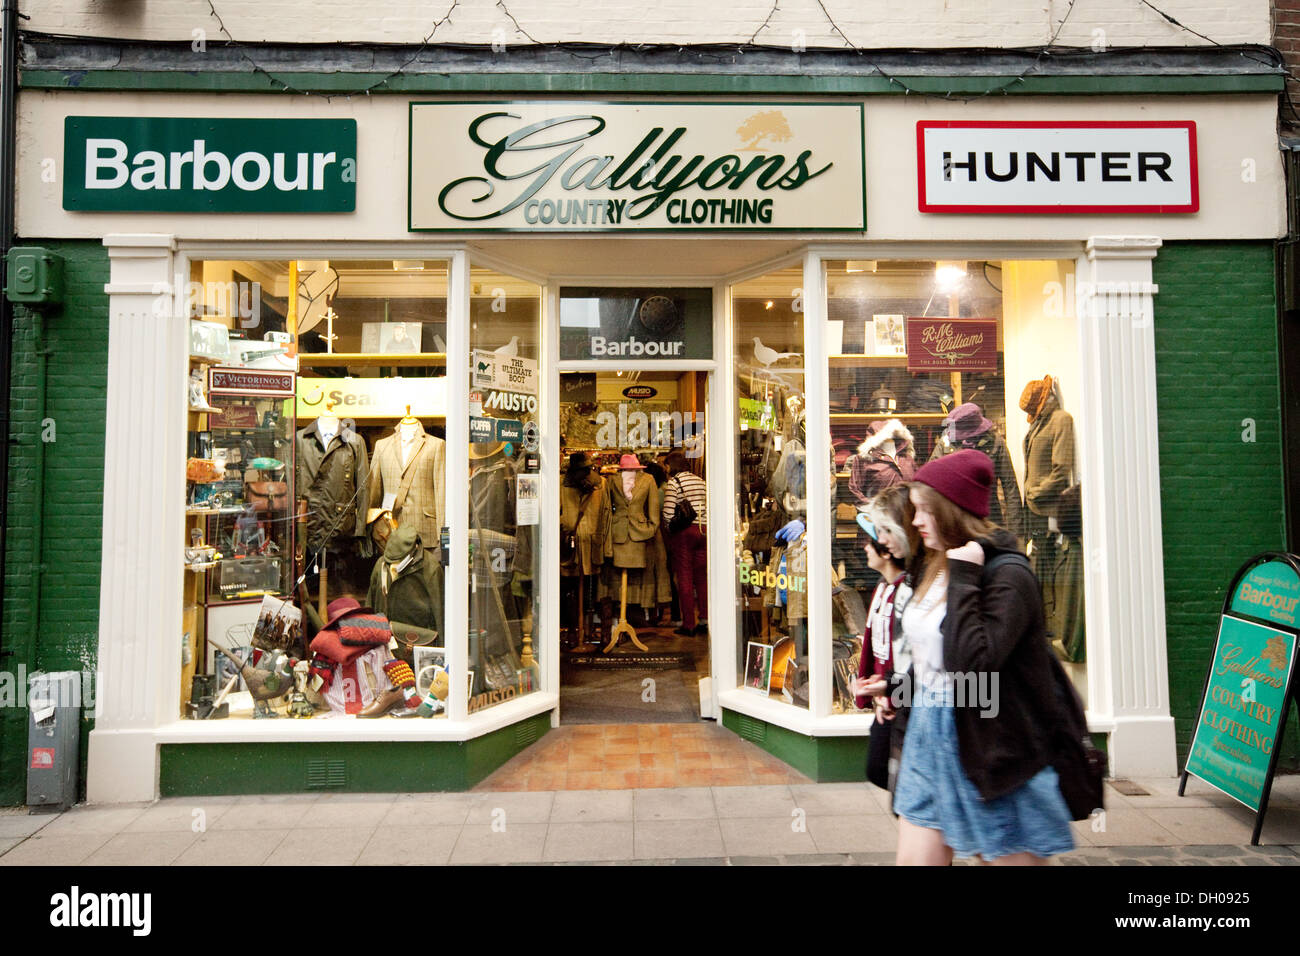 A country clothing store selling upper class outdoor clothes, Norwich, Norfolk UK Stock Photo